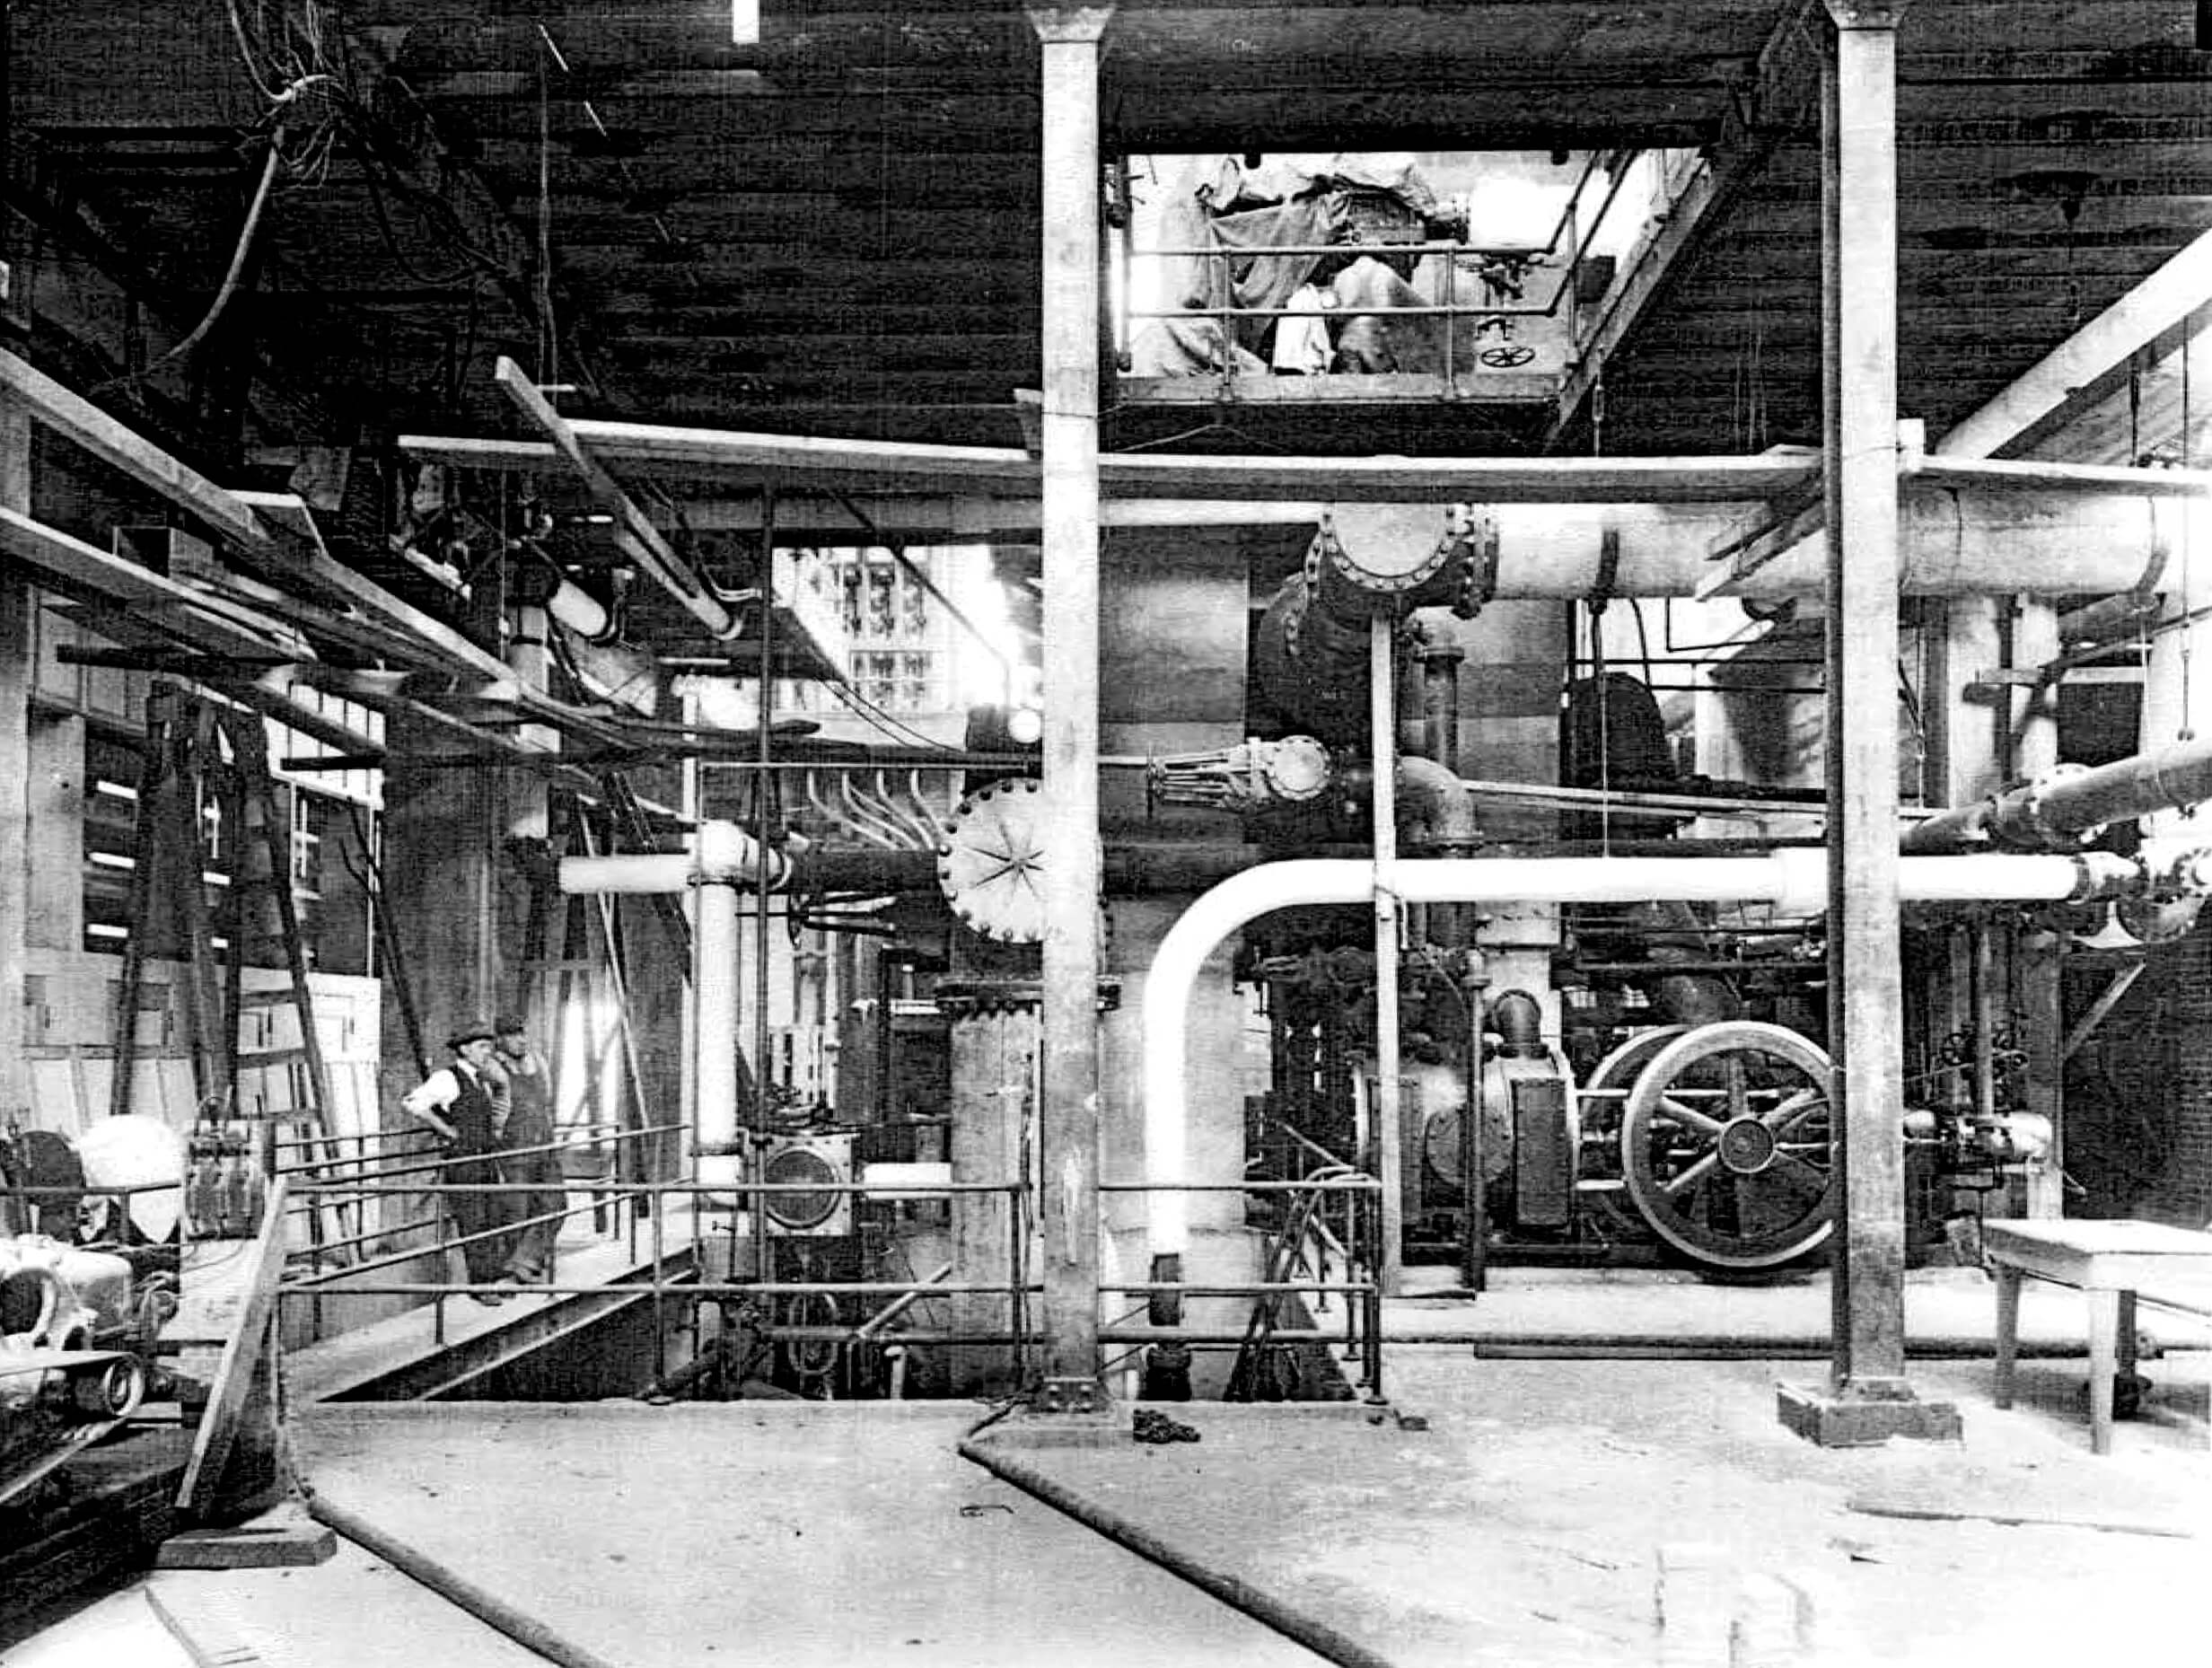 historic photograph showing machinery inside a steam electric power plant